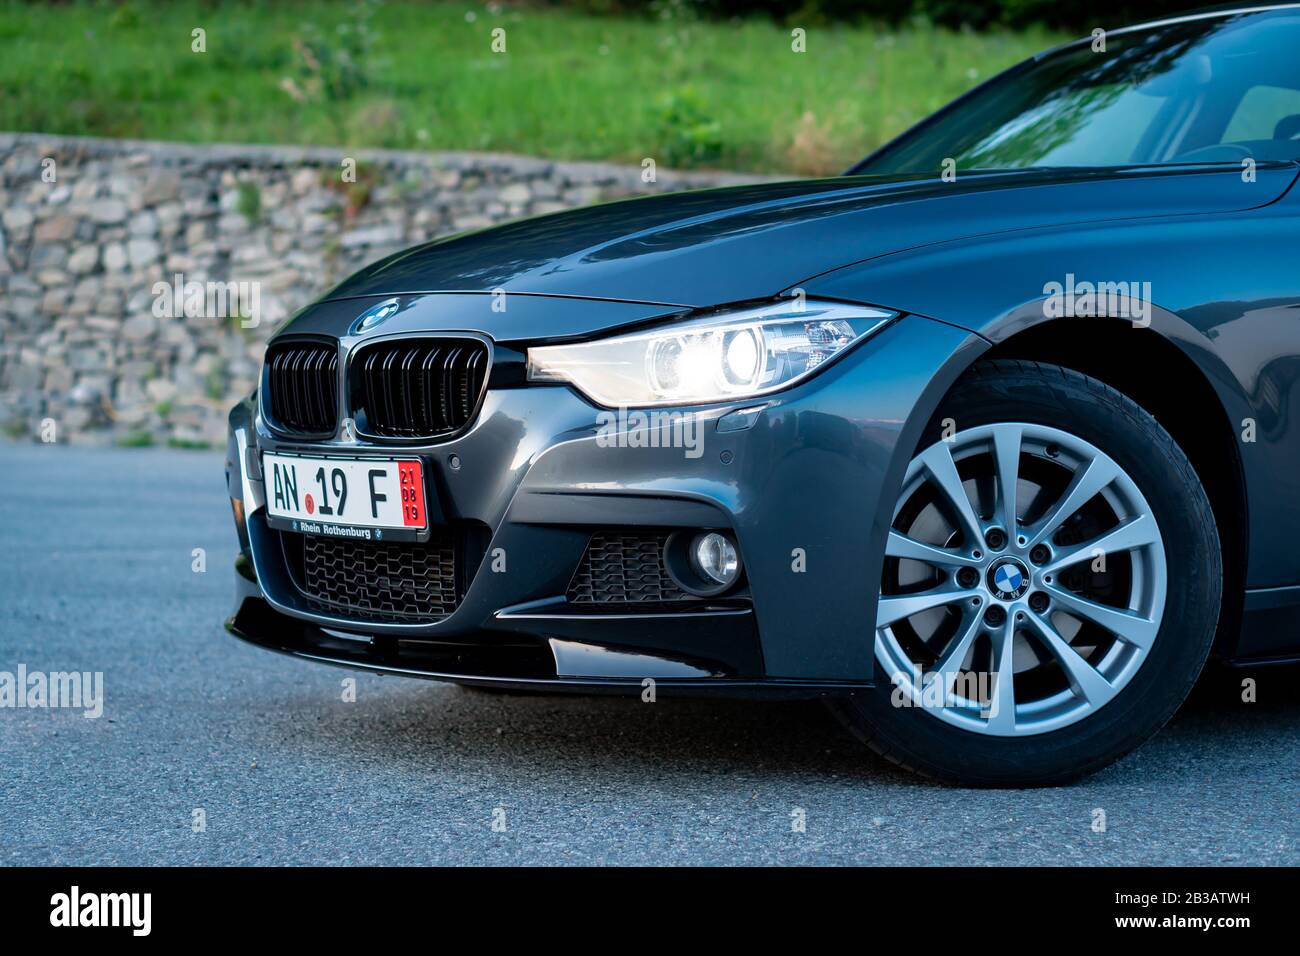 Bmw F30 High Resolution Stock Photography And Images Alamy